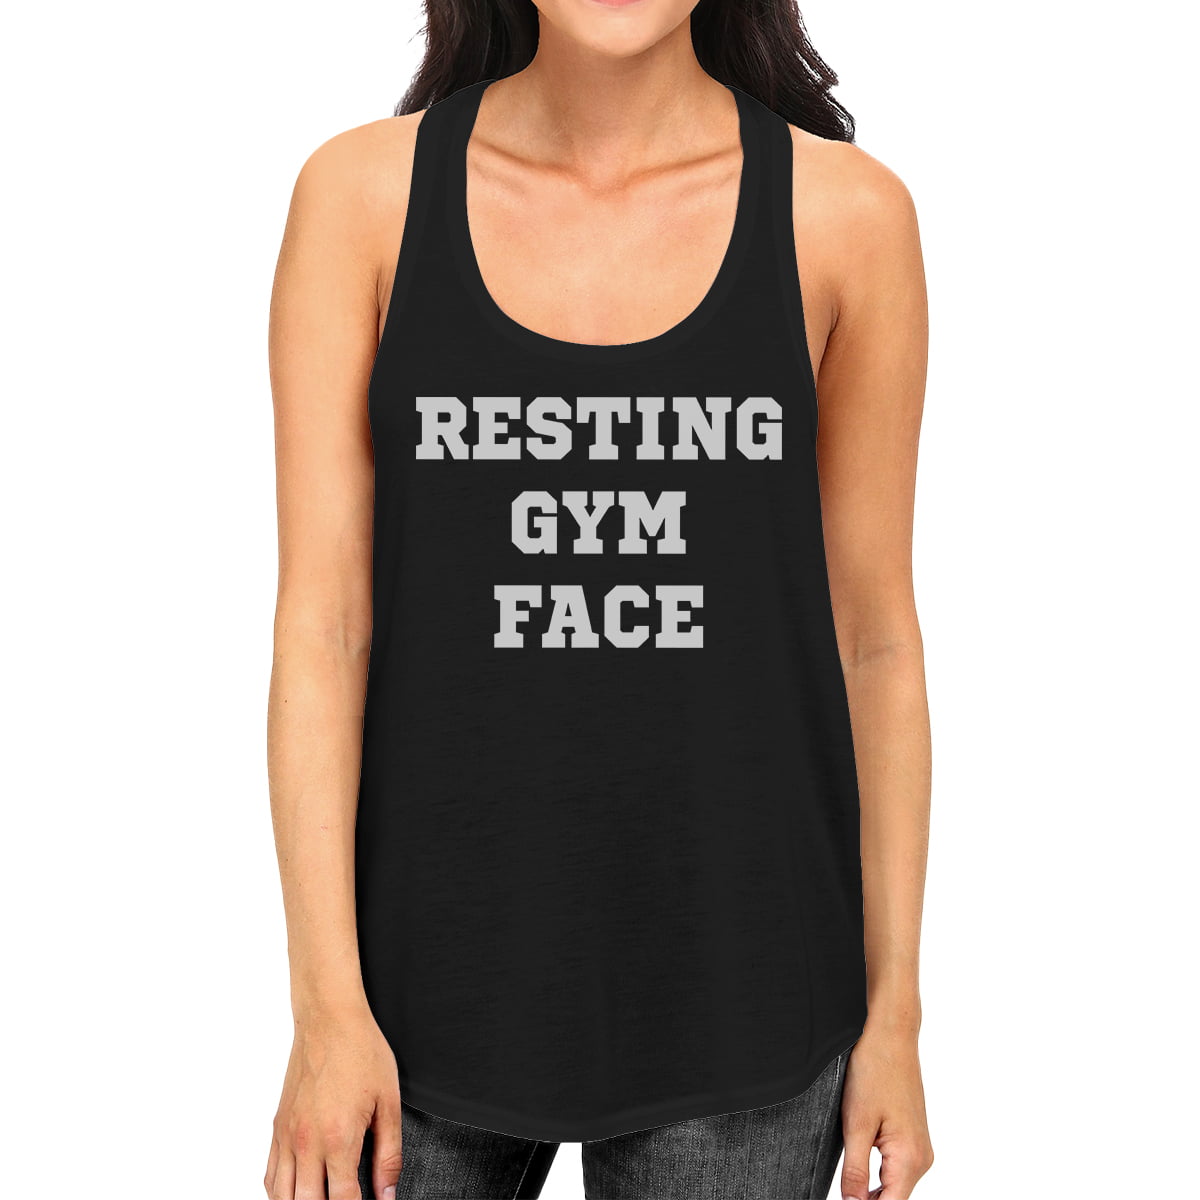 Fannoo Workout Tank Tops for Women-Womens Funny Saying Fitness Gym Sarcastic Racerback Sleeveless Shirts